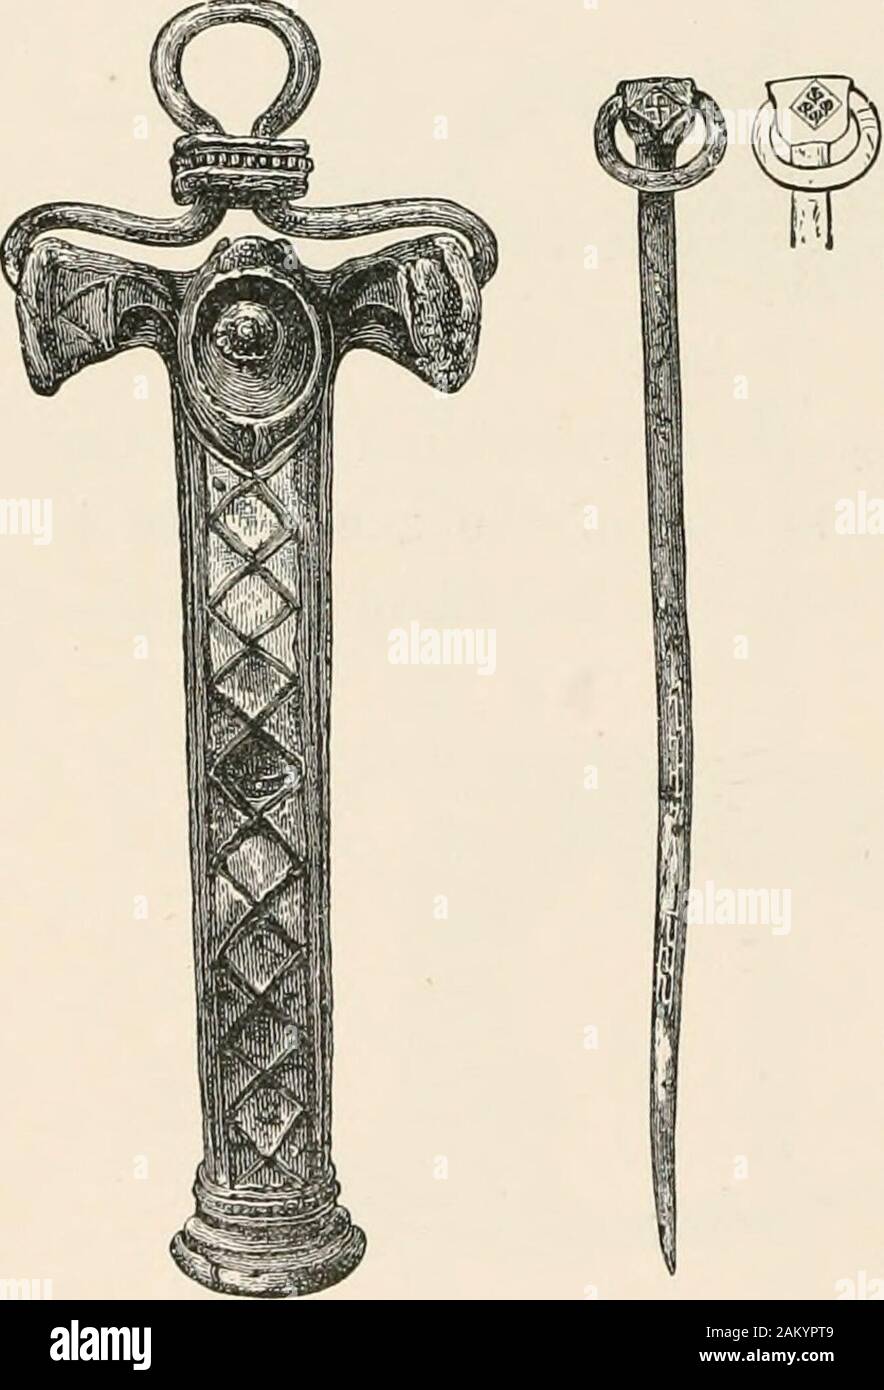 Ancient Scottish lake-dwellings or crannogs : with a supplementary chapter on remains of lake-dwellings in England . Fig. 142.—Fibula (i). (J.) Articles made of Bronze or Brass.—1. Two fibulae, represented full size in Figs. 140 and 141, found about the centre of the refuse-heap. Figs. 142 and 143 represent side 1 130 ANCIENT SCOTTISH LAKE-DWELLINGS. and back views of a third fibula, much more elaborately. Fig. 143.—Back viewof Fibula, Fig. 142. Fig. 144.-BronzeEing Pin (i). Stock Photo